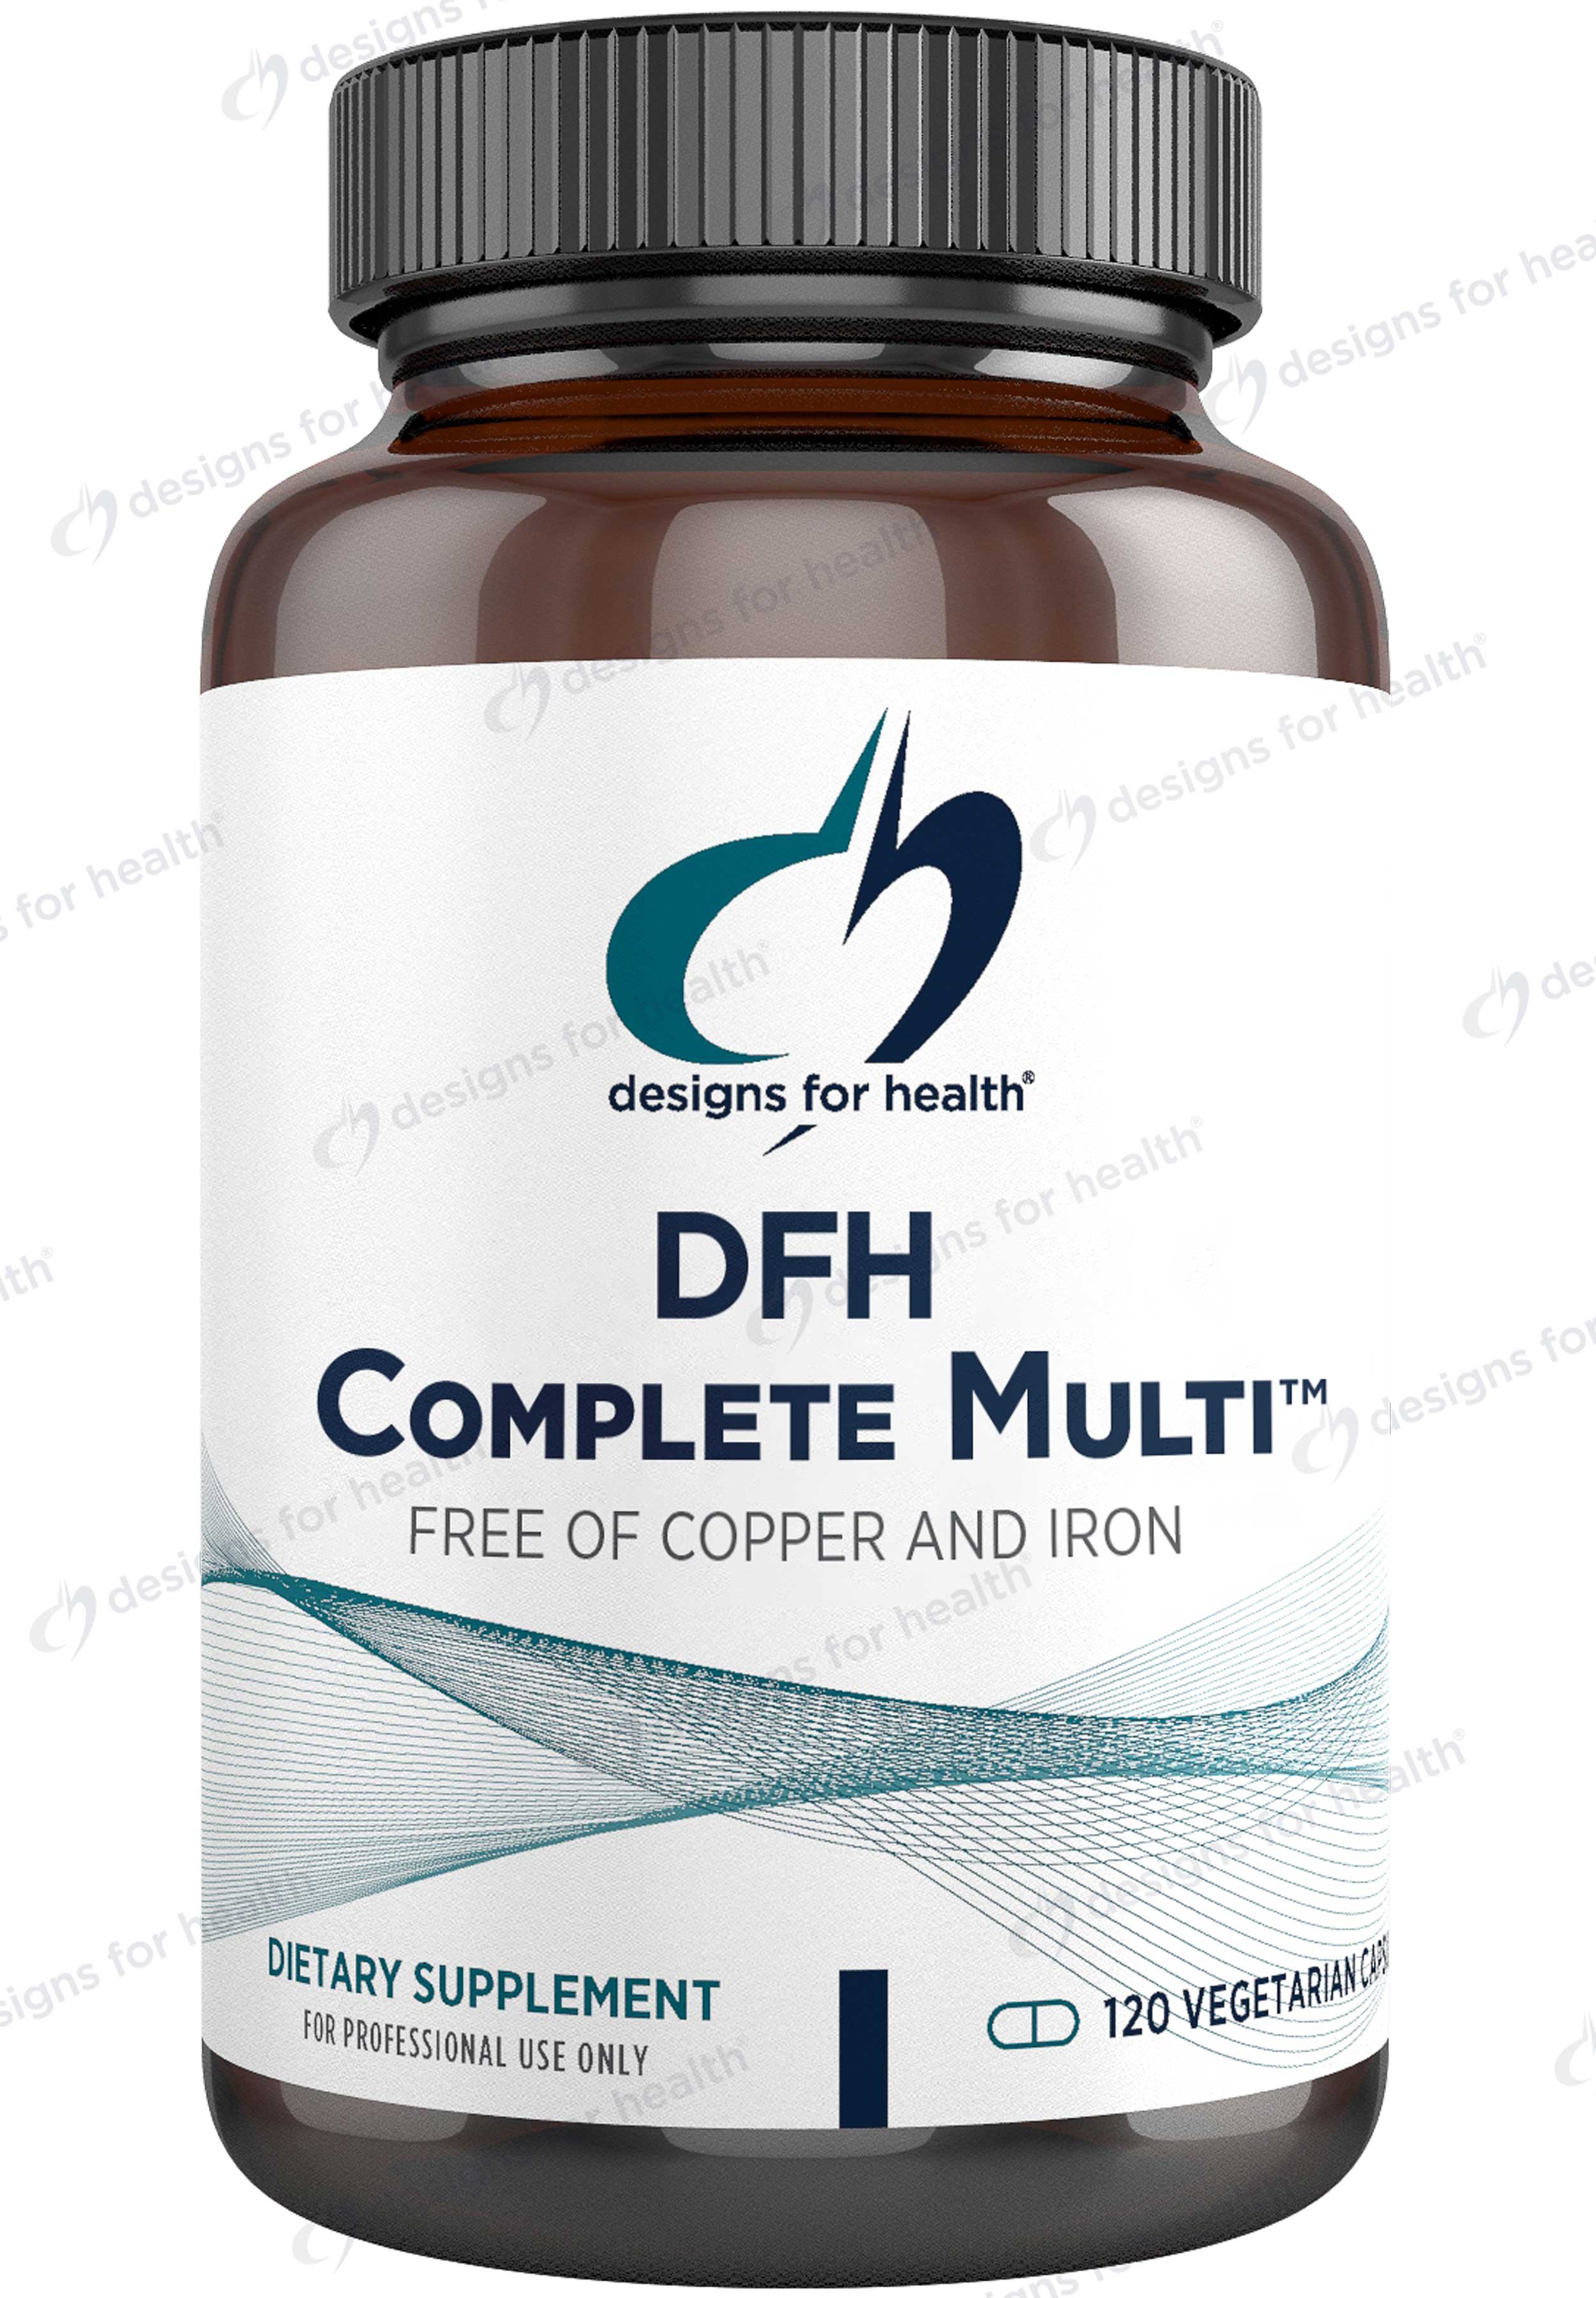 Designs for Health DFH Complete Multi (Free of Copper and Iron)